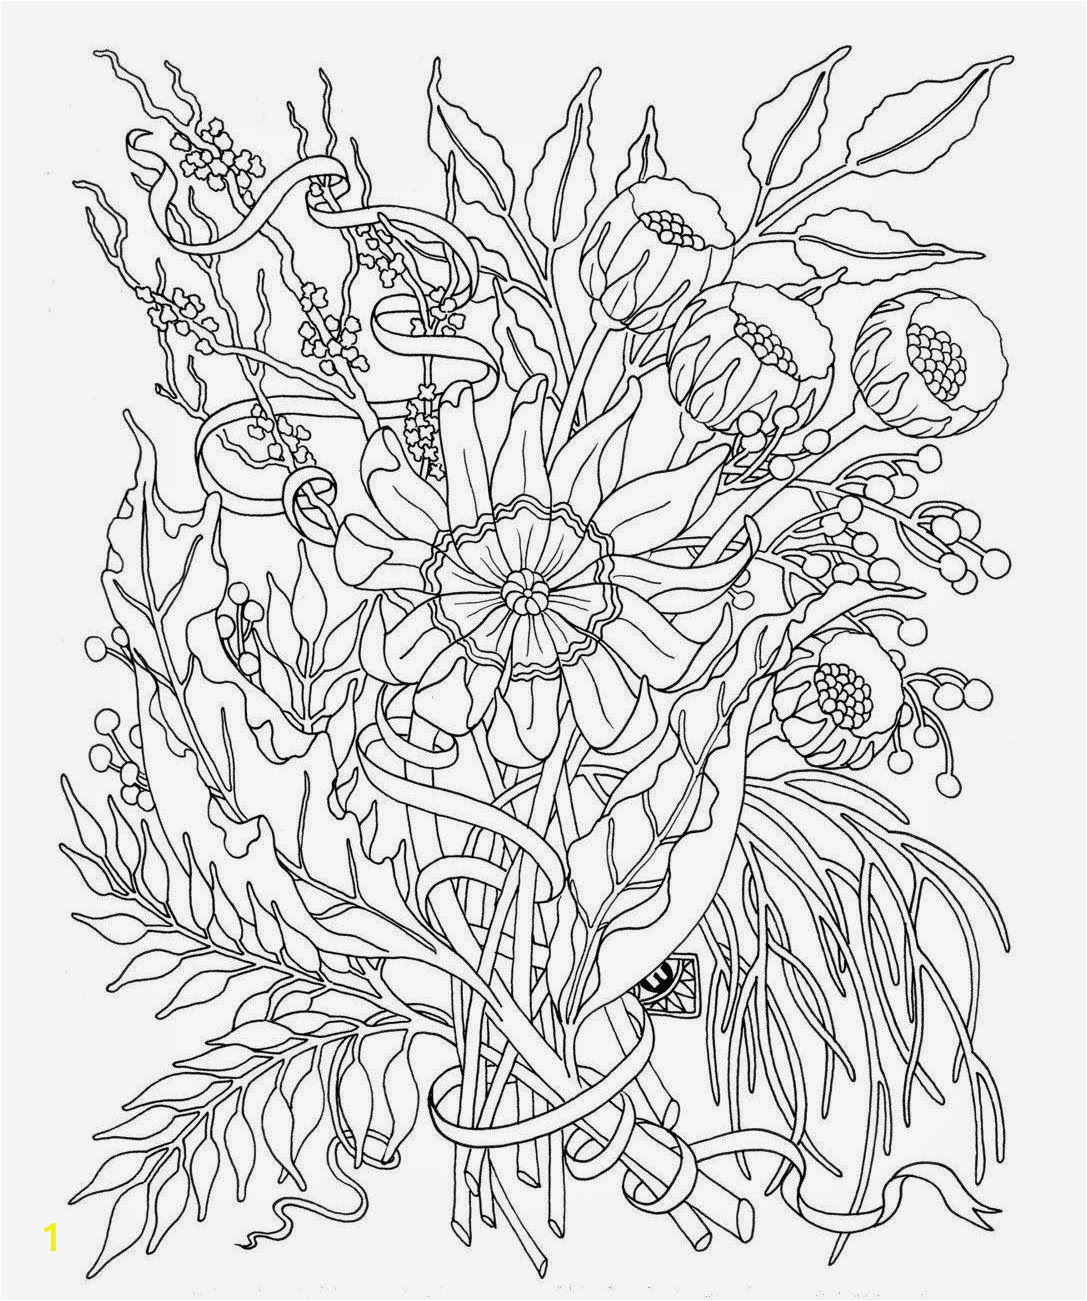 Coloring Pages Of Flowers Printable Coloring Pages Flowers for Teens